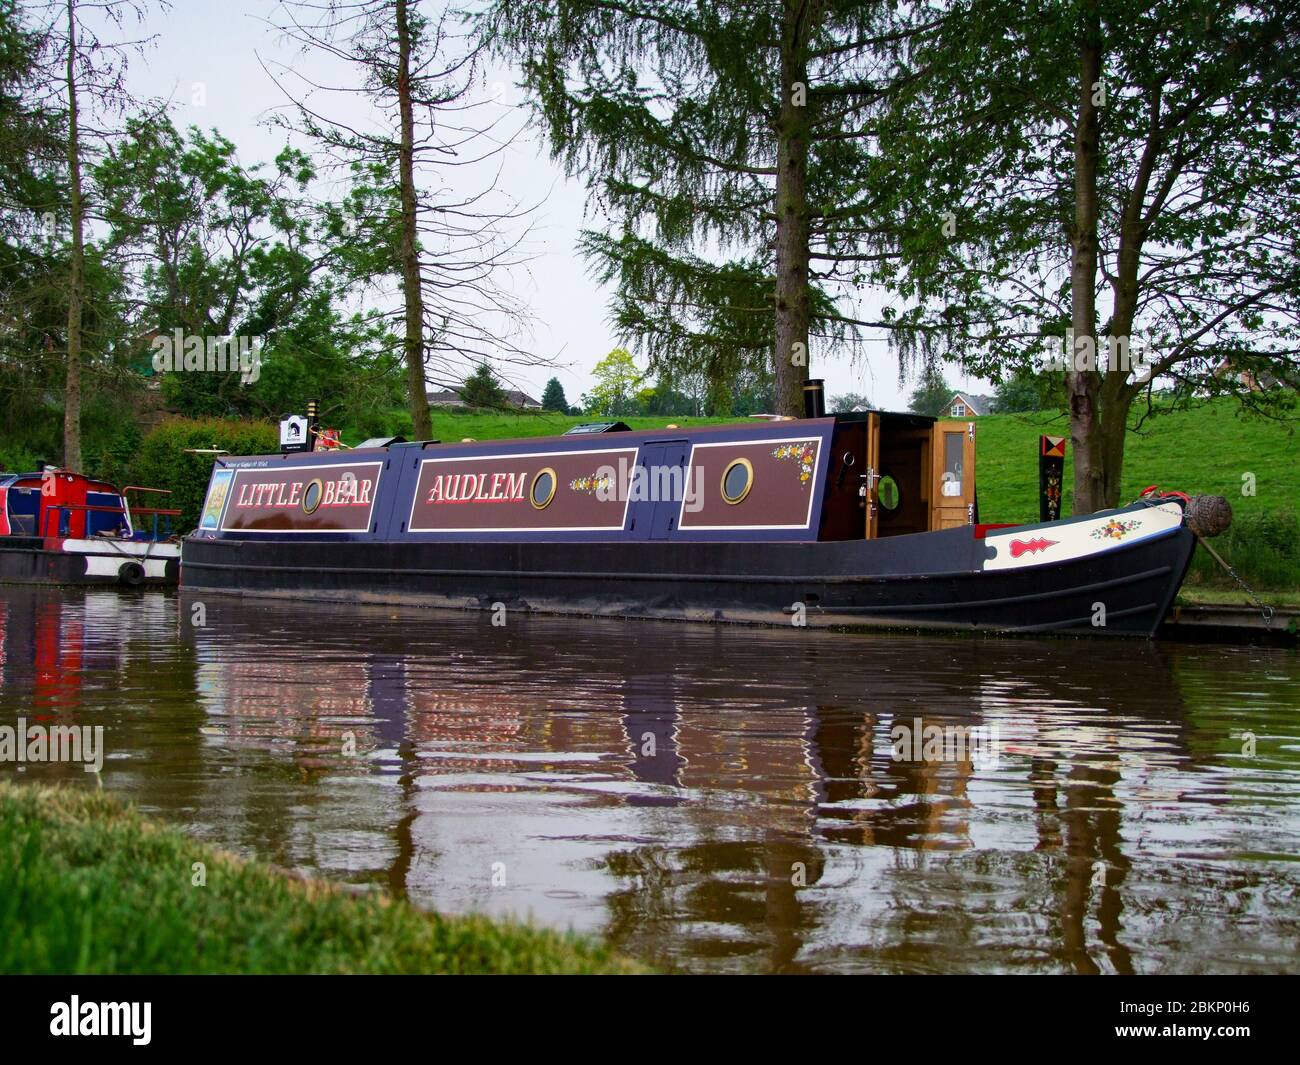 Small narrowboat called Little Bear on the canal at Audlem, Cheshire UK Stock Photo